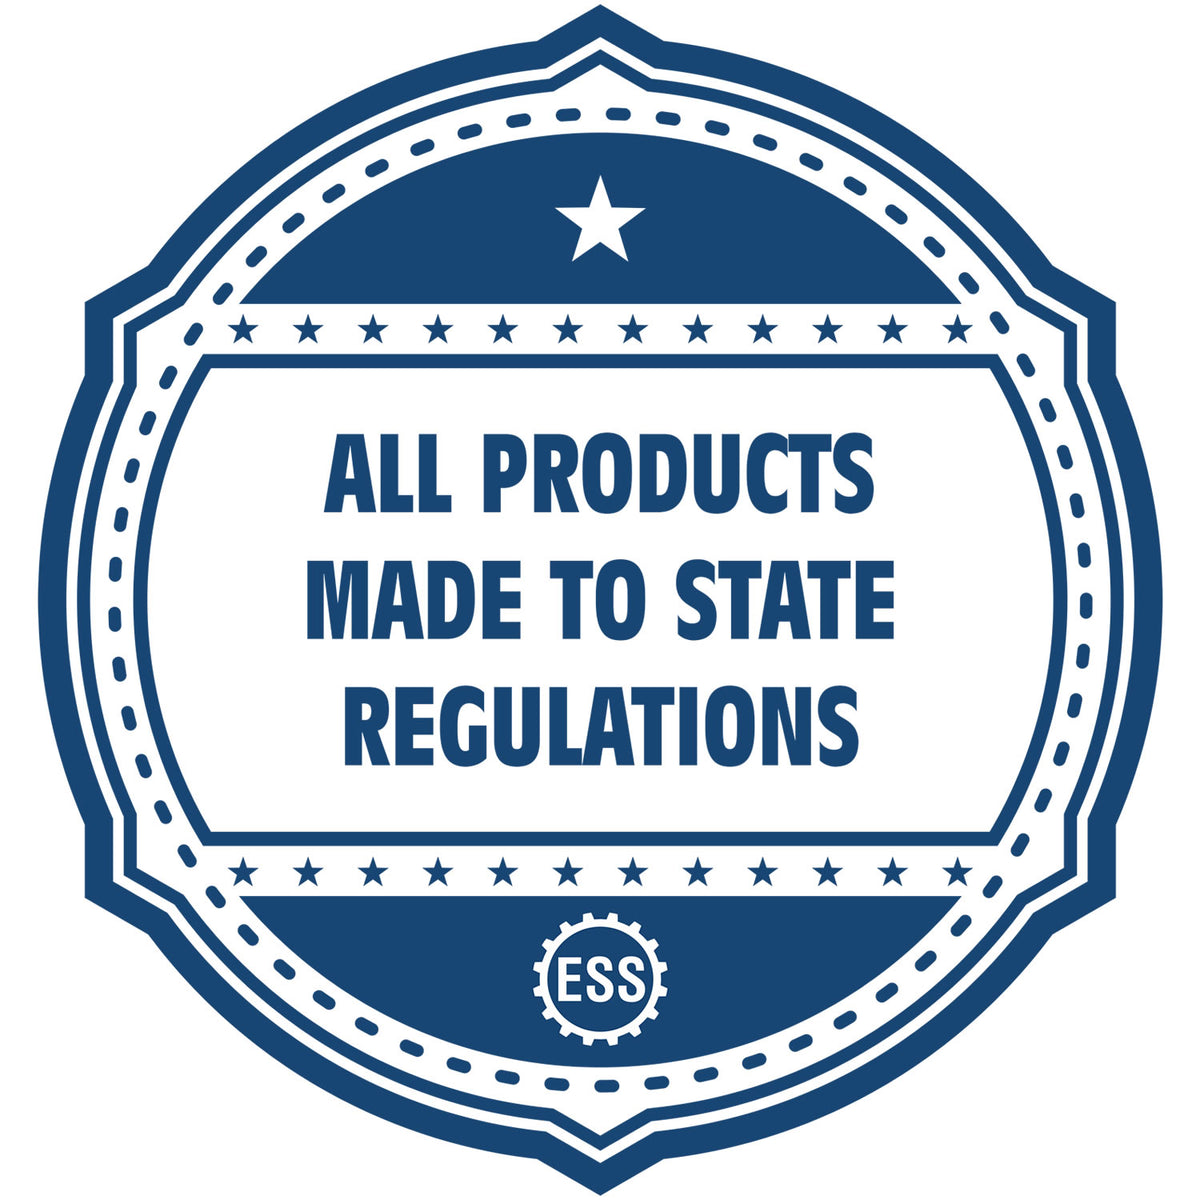 An icon or badge element for the Long Reach Pennsylvania PE Seal showing that this product is made in compliance with state regulations.